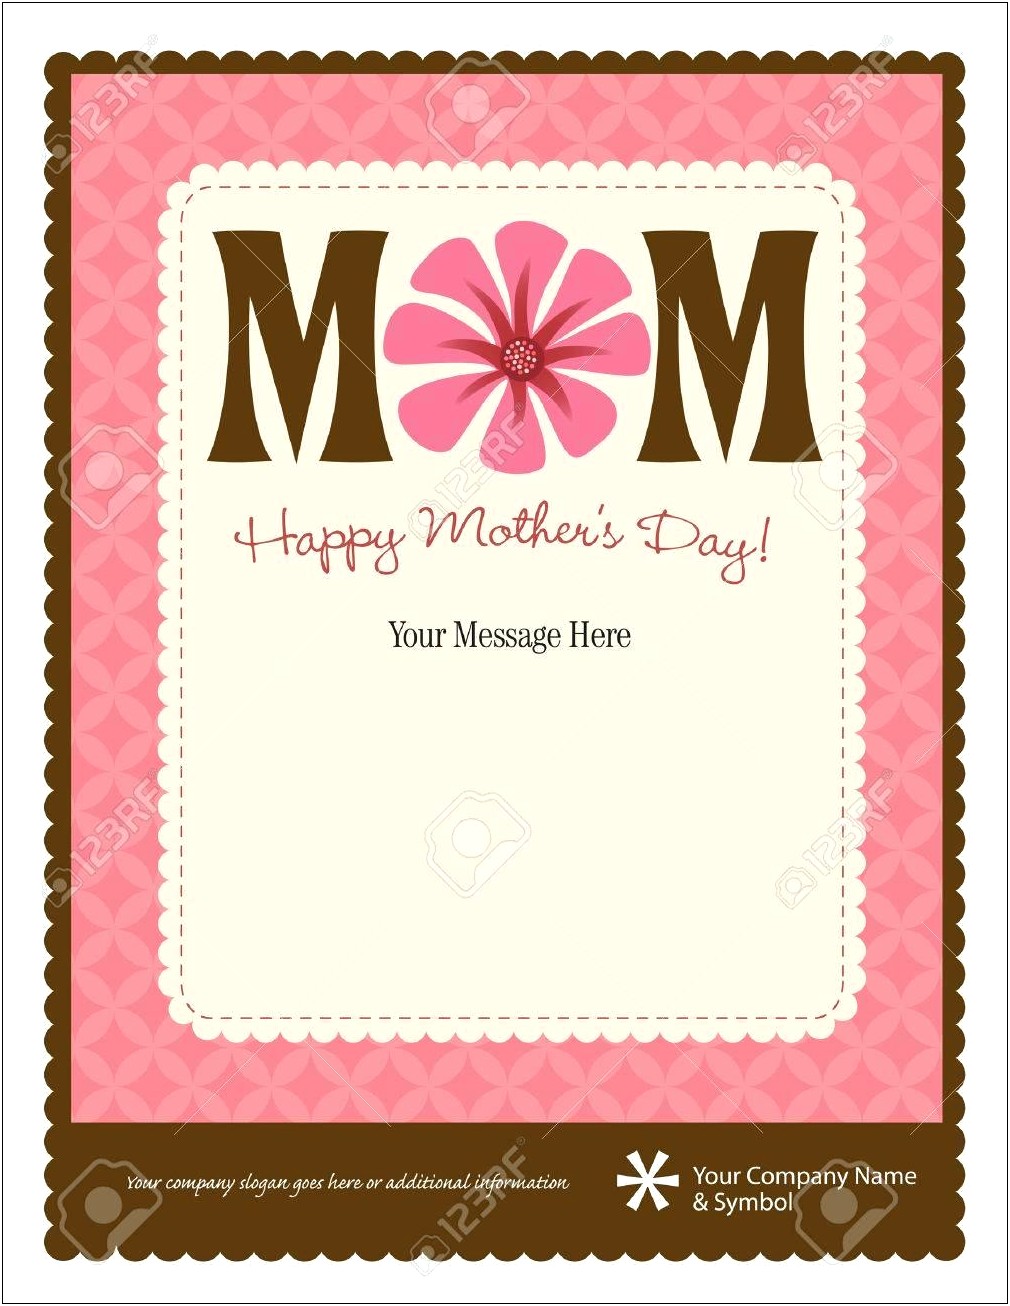 Mother's Day Flyer Template Free